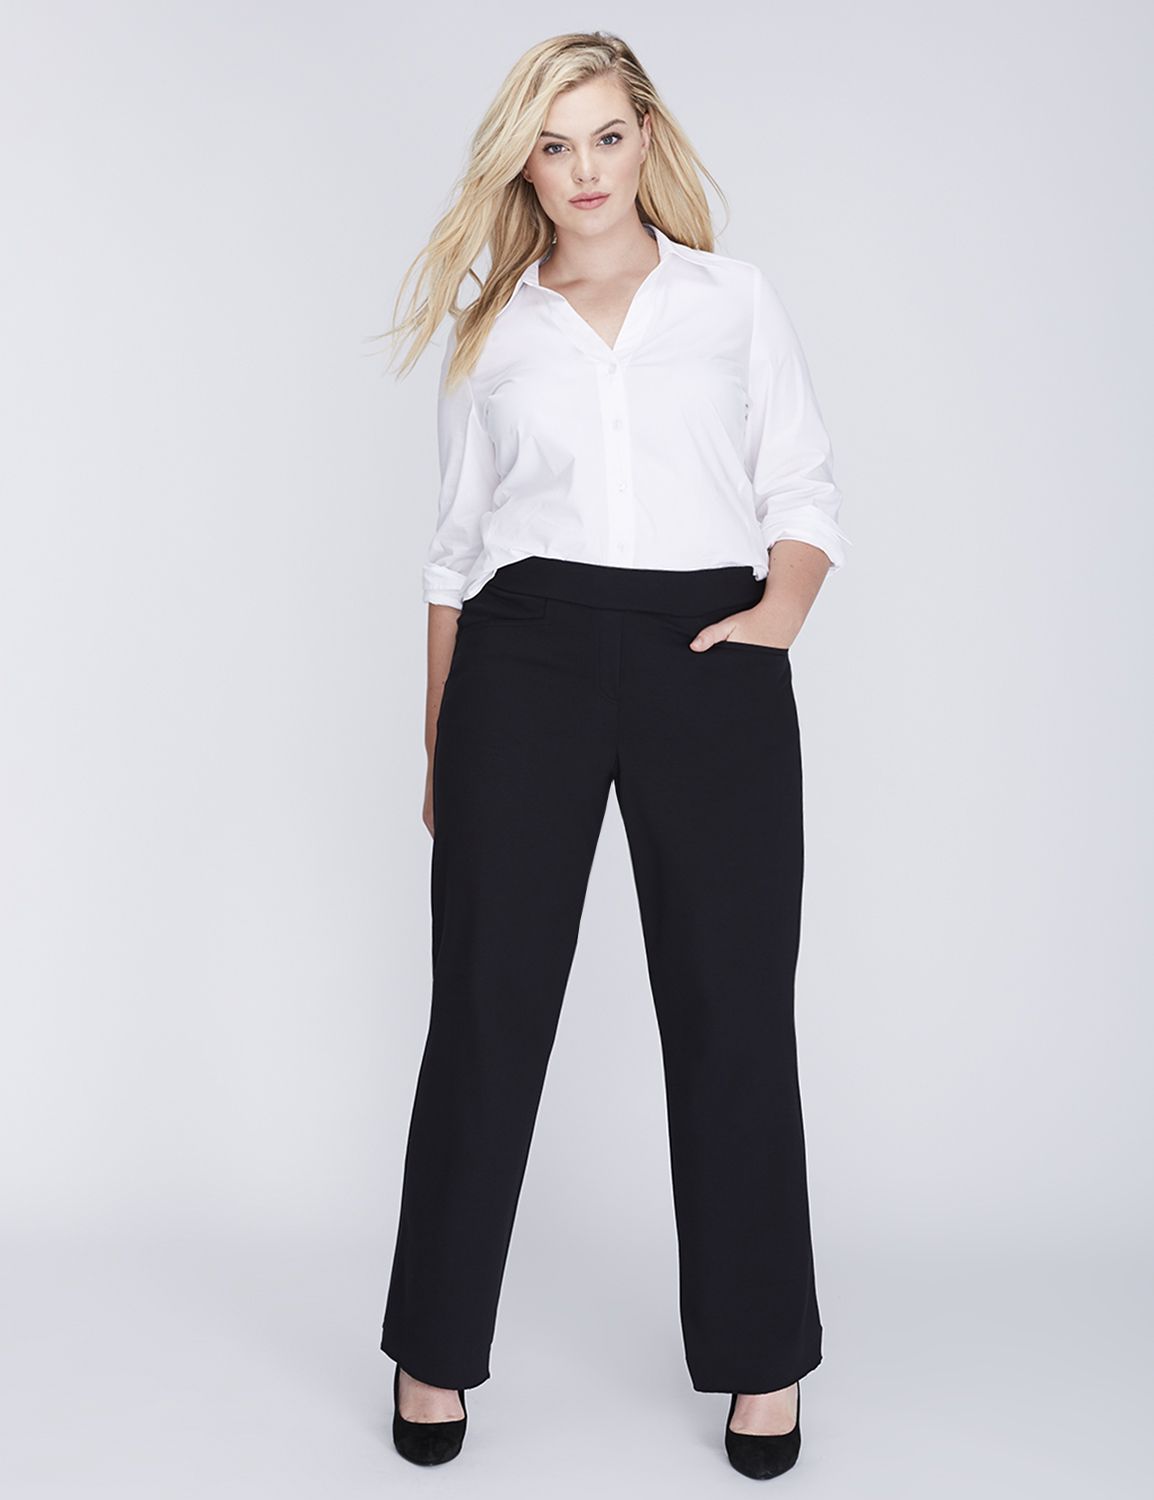 View All Pants & Jeans for Plus Size Women | Lane Bryant